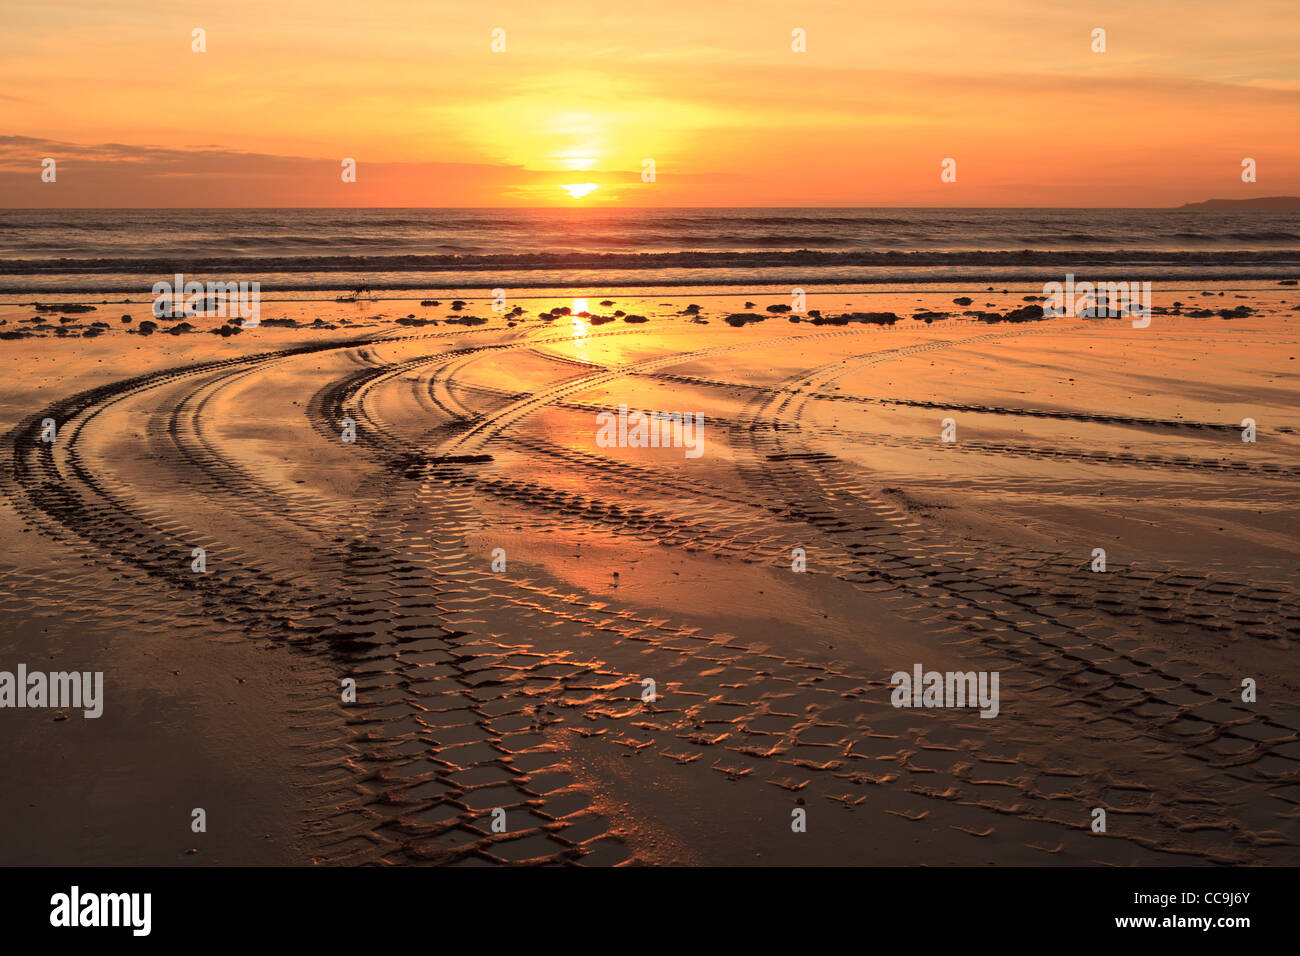 Tractor trails in Sunset, Aberavon Beach, Port Talbot, South Wales, UK Stock Photo